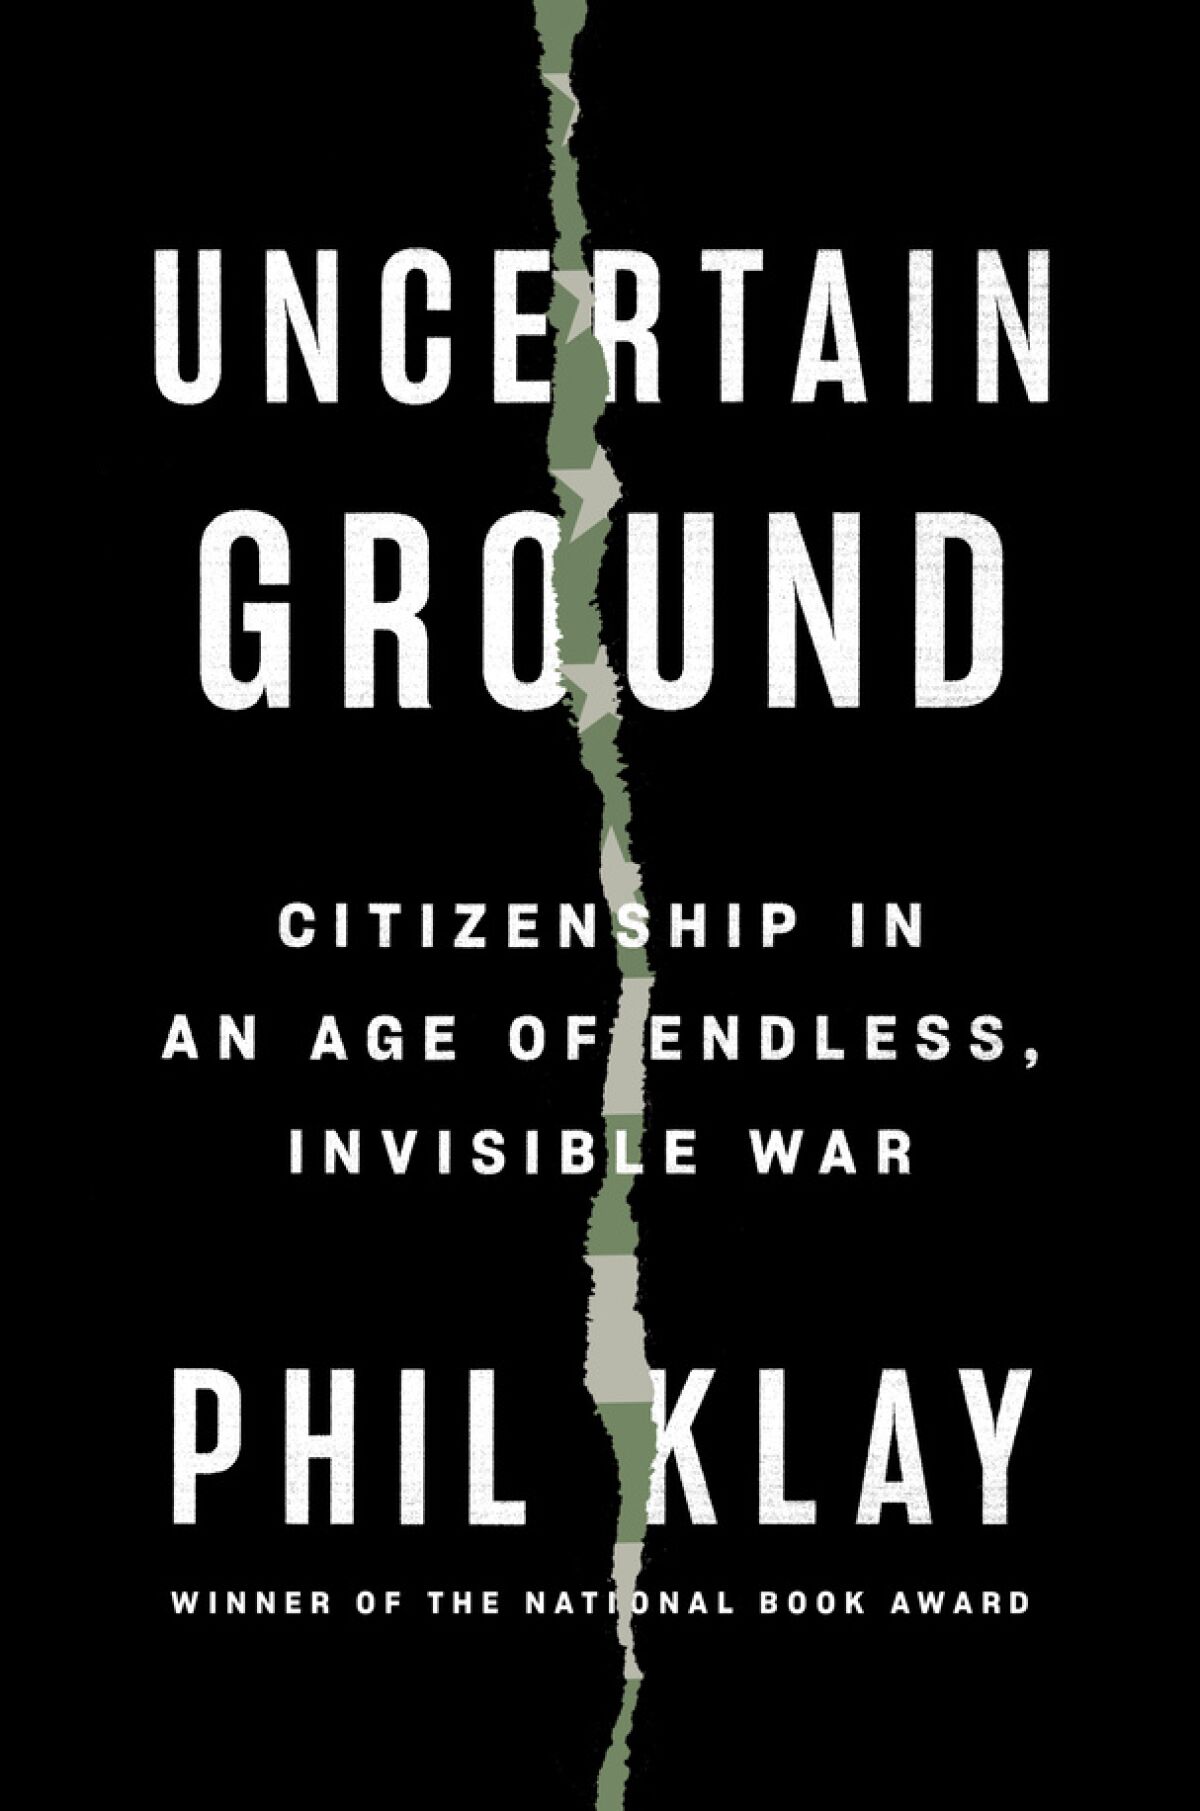 "Uncertain Ground" by Phil Klay